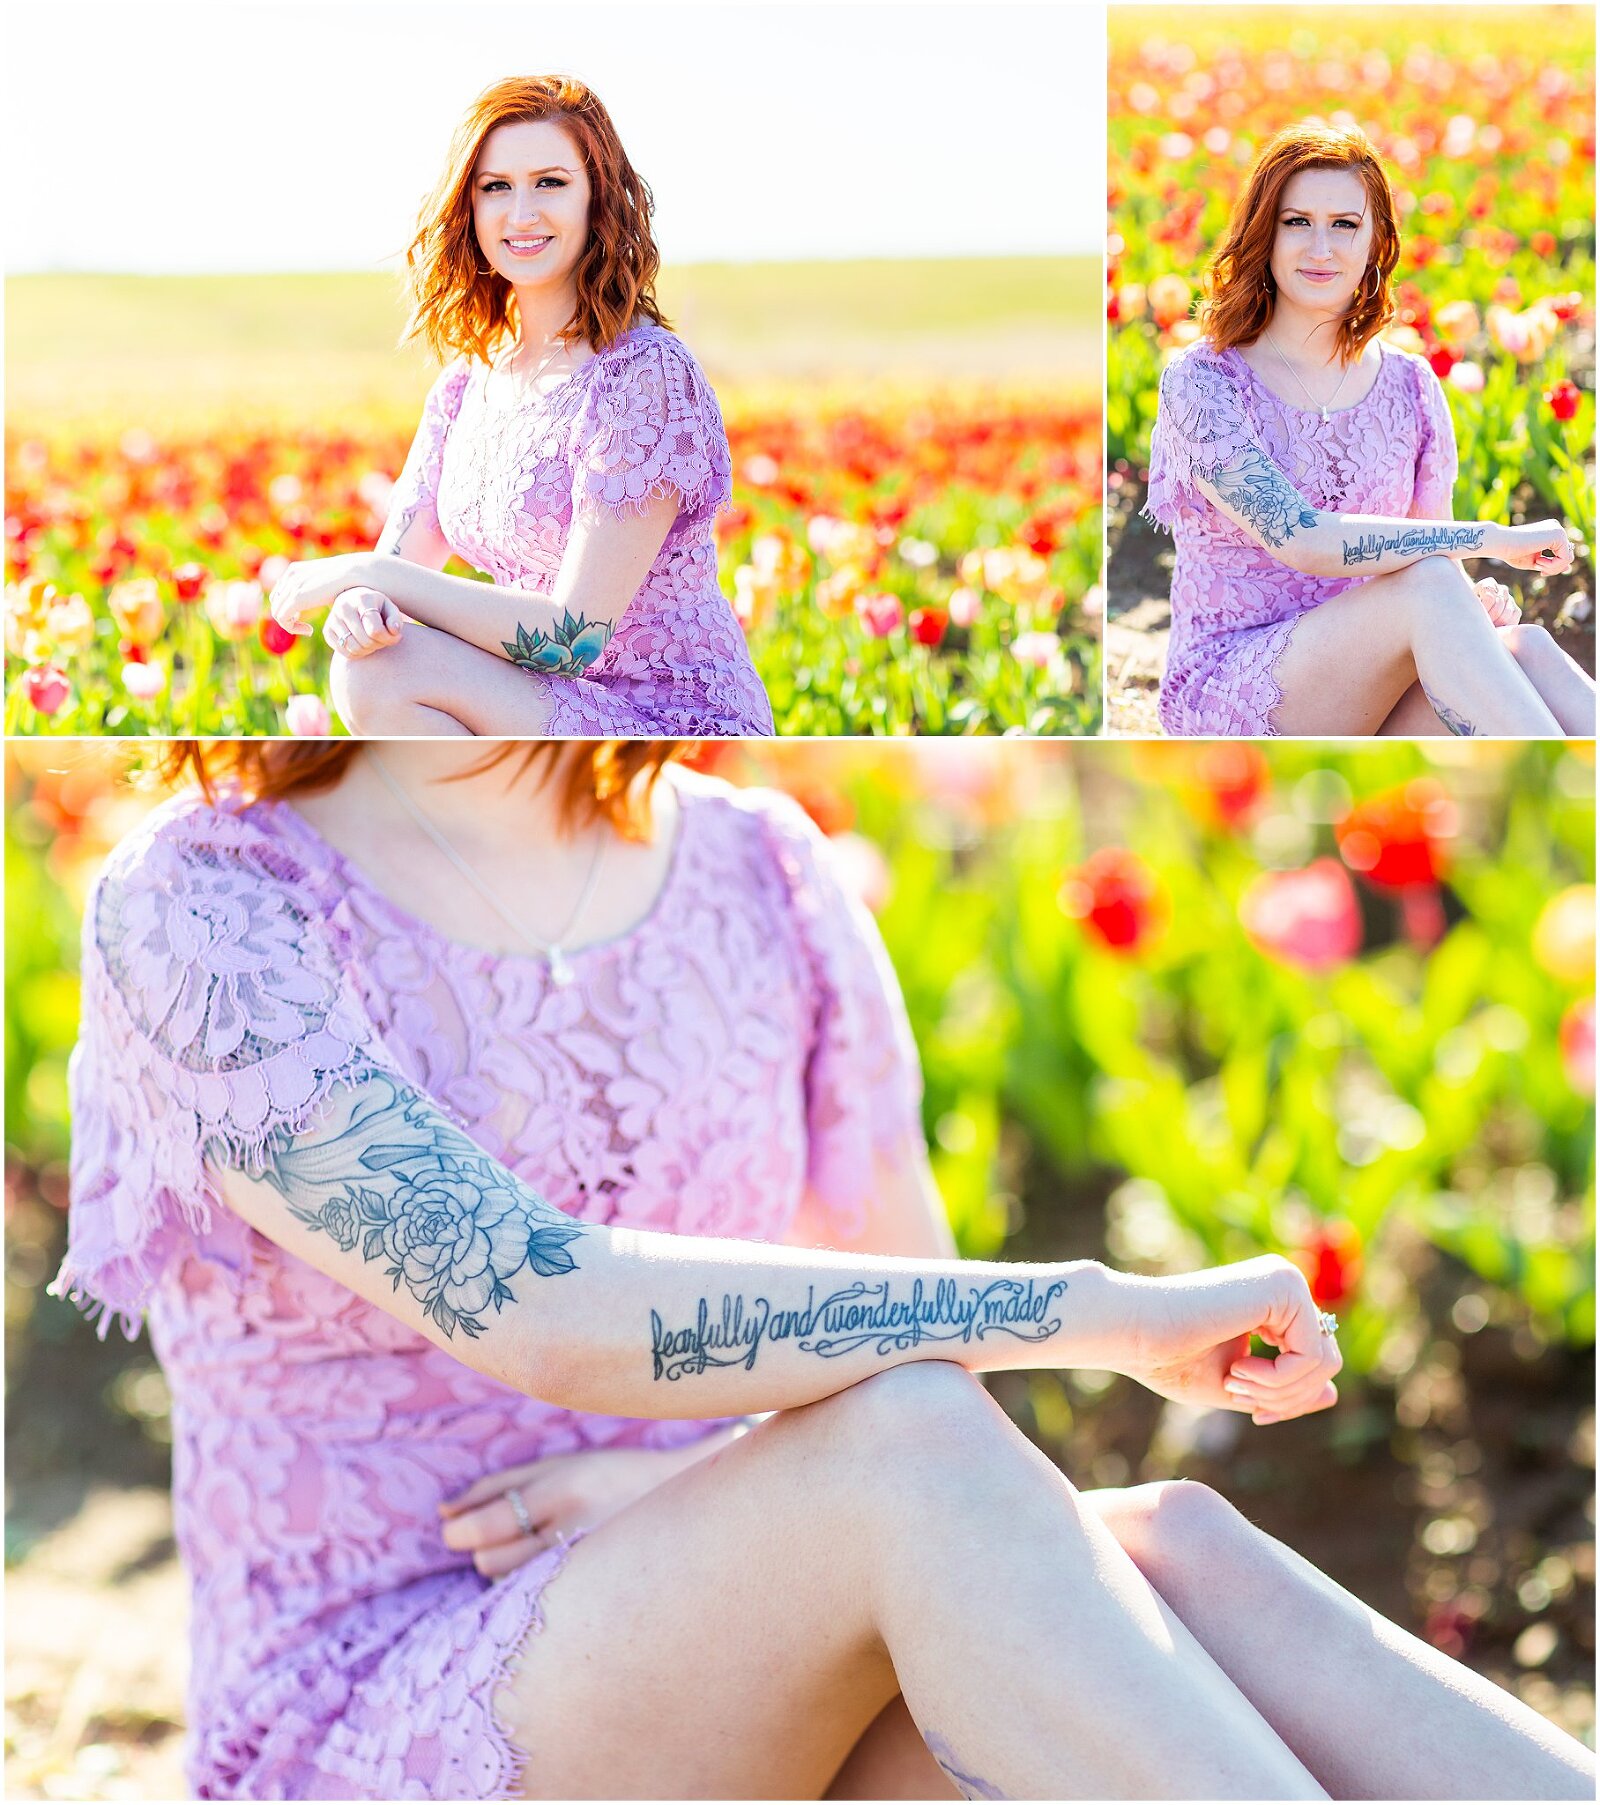 Heather’s BEAUTIFUL college grad photos took place in the Tulip Field at Burnside Farms in Nokesville, Virginia. With her beautiful red hair and lilac dress, this TULIP SENIOR SESSION blew me away!! It was a perfect spring day in April, and we had the field almost to ourselves. Click the link to see her FULL TULIP SENIOR SESSIONS! Photo by Bethanie Vetter Photography LLC. Website: bethanievetter.com #tulipseniorphotos #seniorphotos #virginiasenior #seniorportraits #springphotos #springflowers #springtulips #tulips #tuliplove #springseniorphotos #springsenior #floralsesssion #floralphotos #tuliphotos #bethanievetterportraits #bethanievetterphotography #lilacdress #purpledress #redhair #auburn